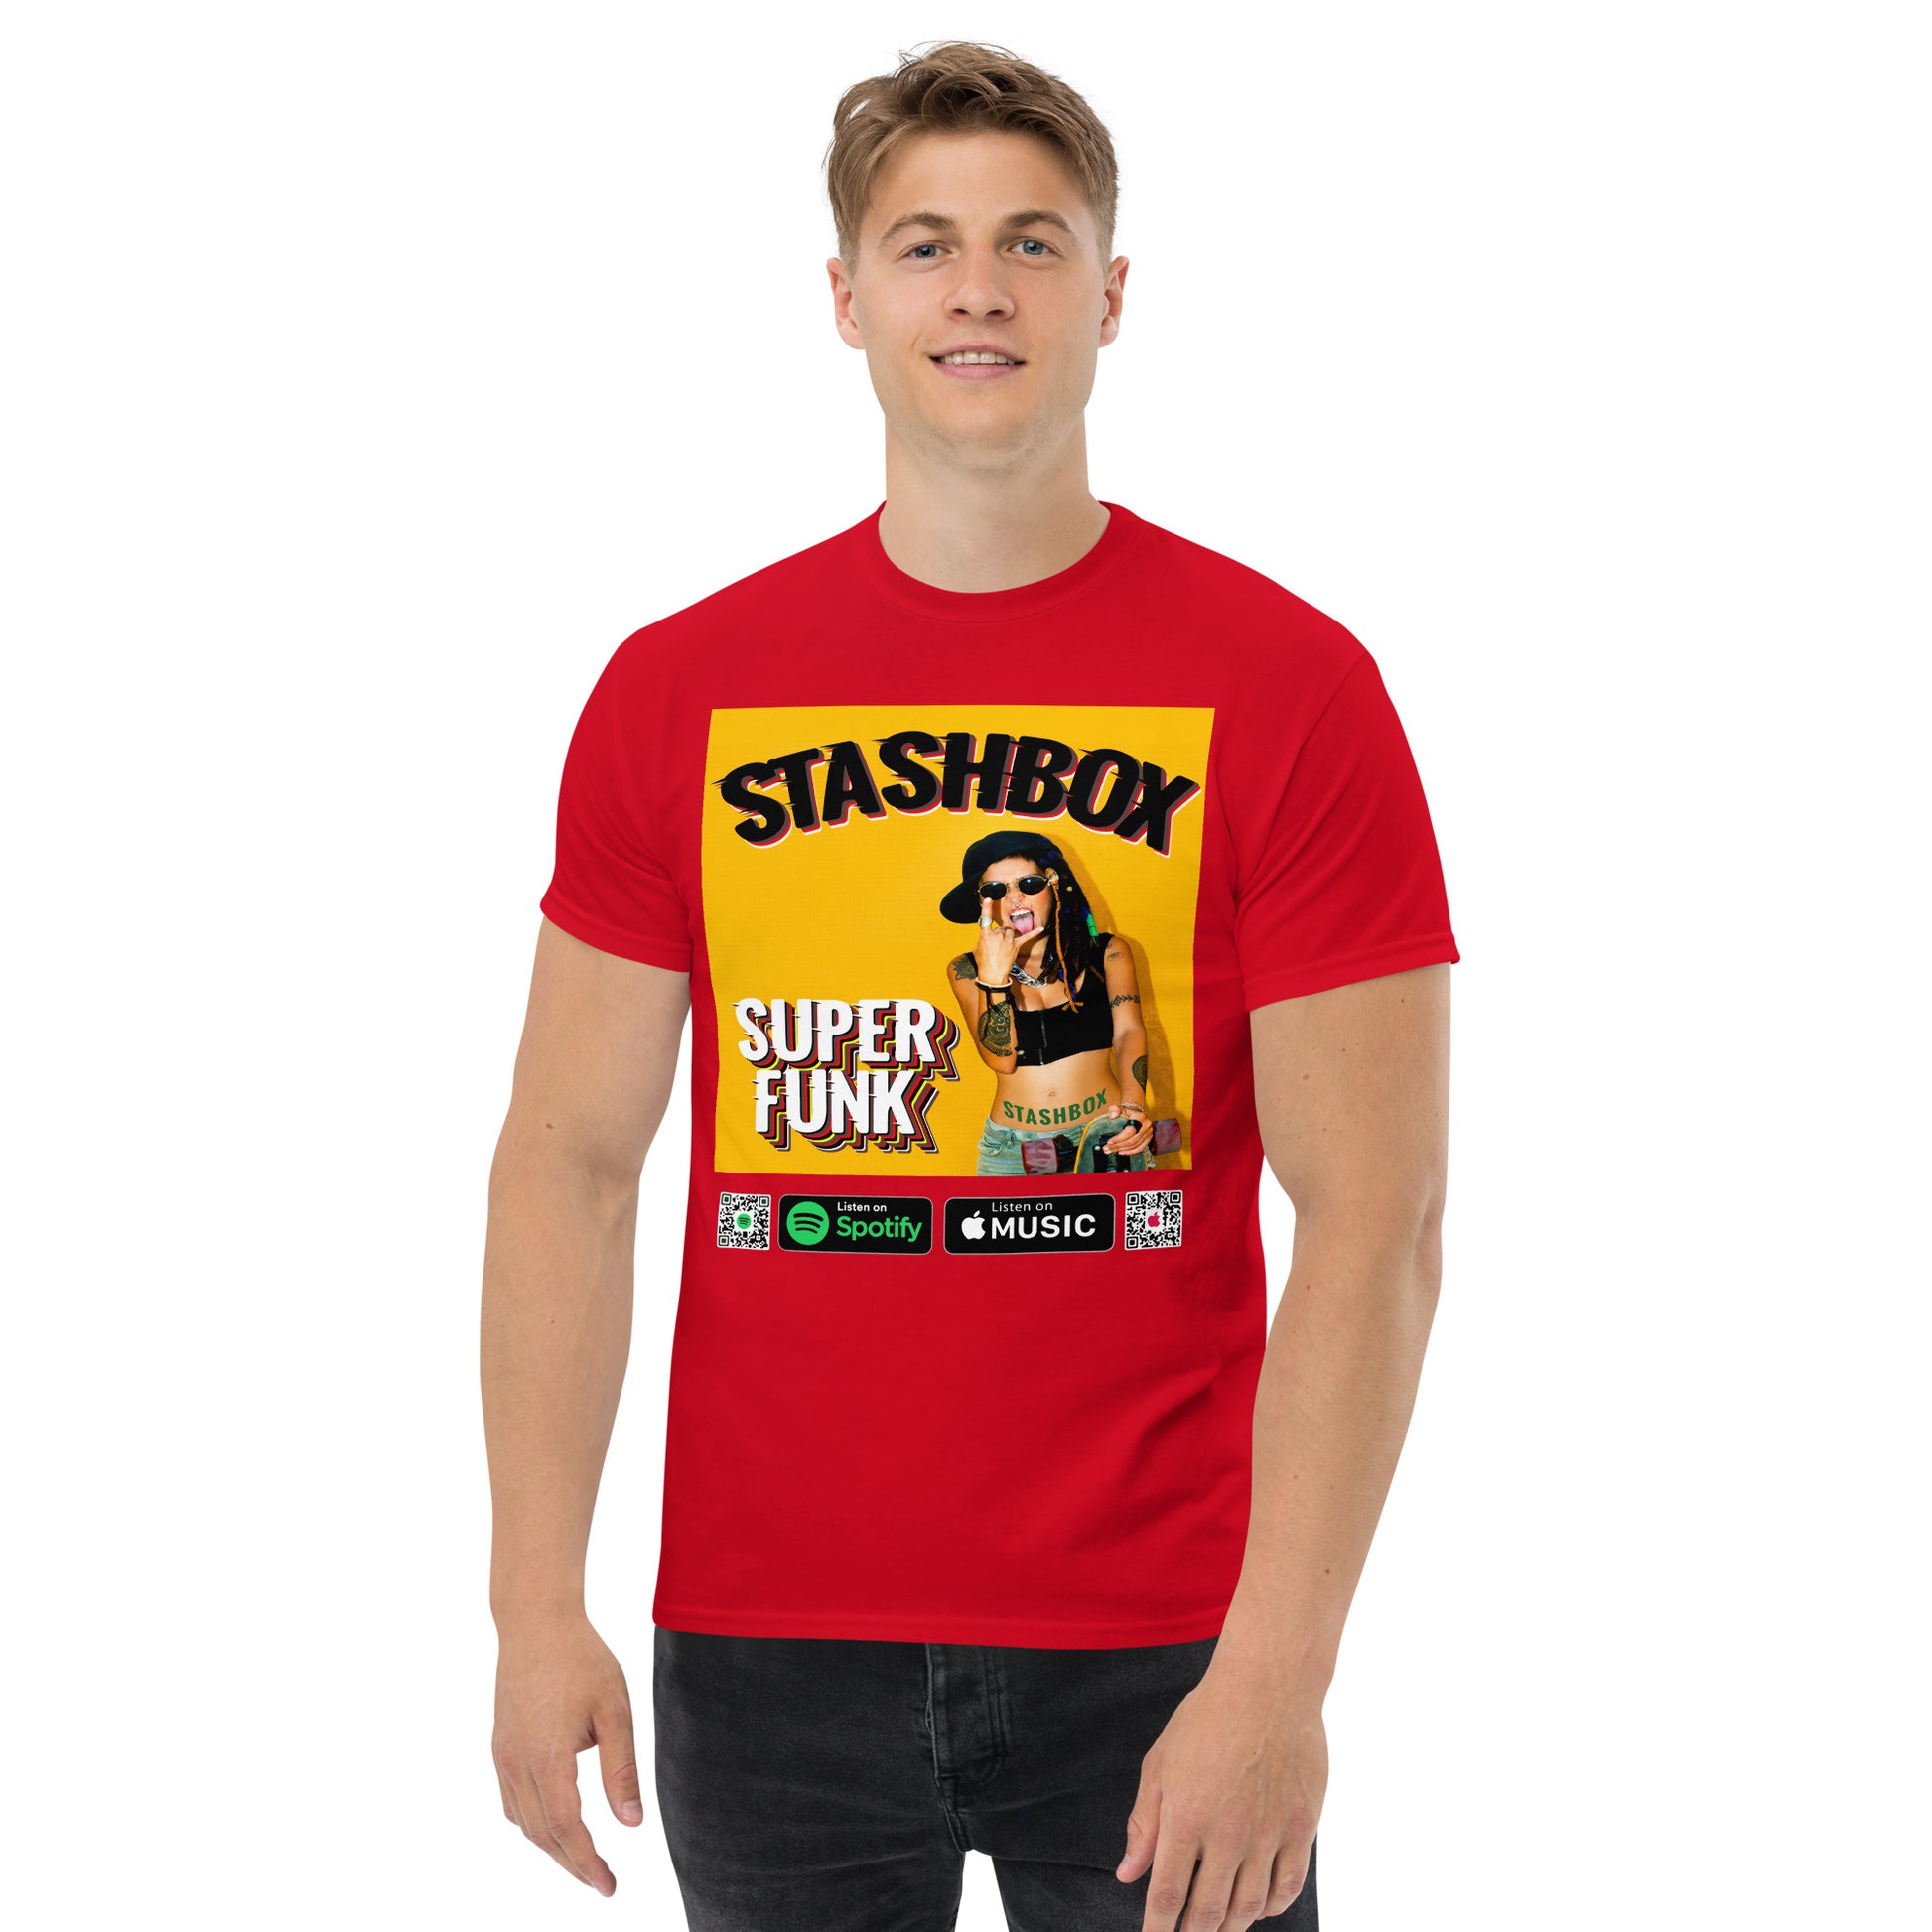 Groove in Style: Super Funk Men's Classic Tee. Dive into the rhythm with our Super Funk tee, merging music and fashion seamlessly. Express your love for funk with this exclusive Stashbox artwork. #FunkyFashion #MusicLoverTee #StashboxGroove